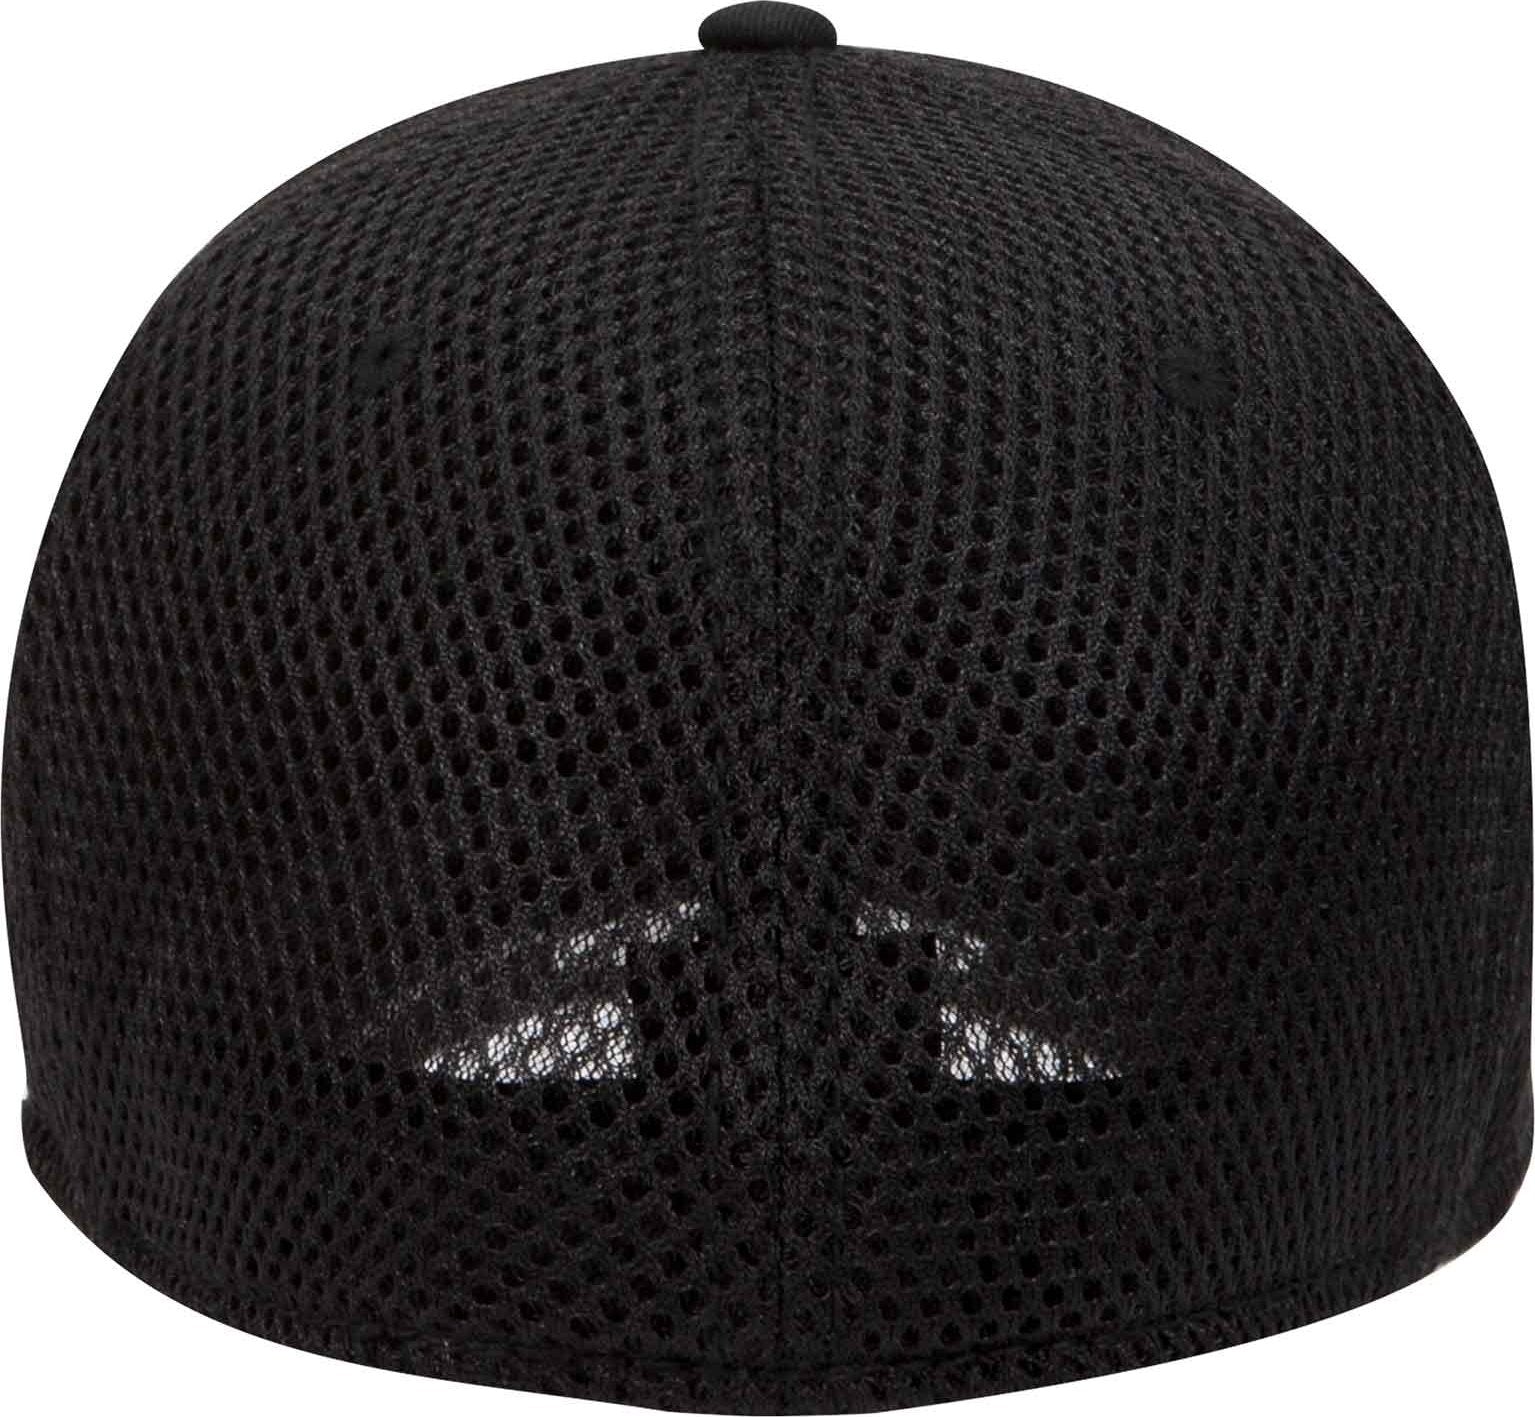 OTTO 11-1169 Cotton Twill w/ Stretchable Polyester Air Mesh Back "OTTO Flex" 6 Panel Low Profile Baseball Cap - Black - HIT a Double - 1